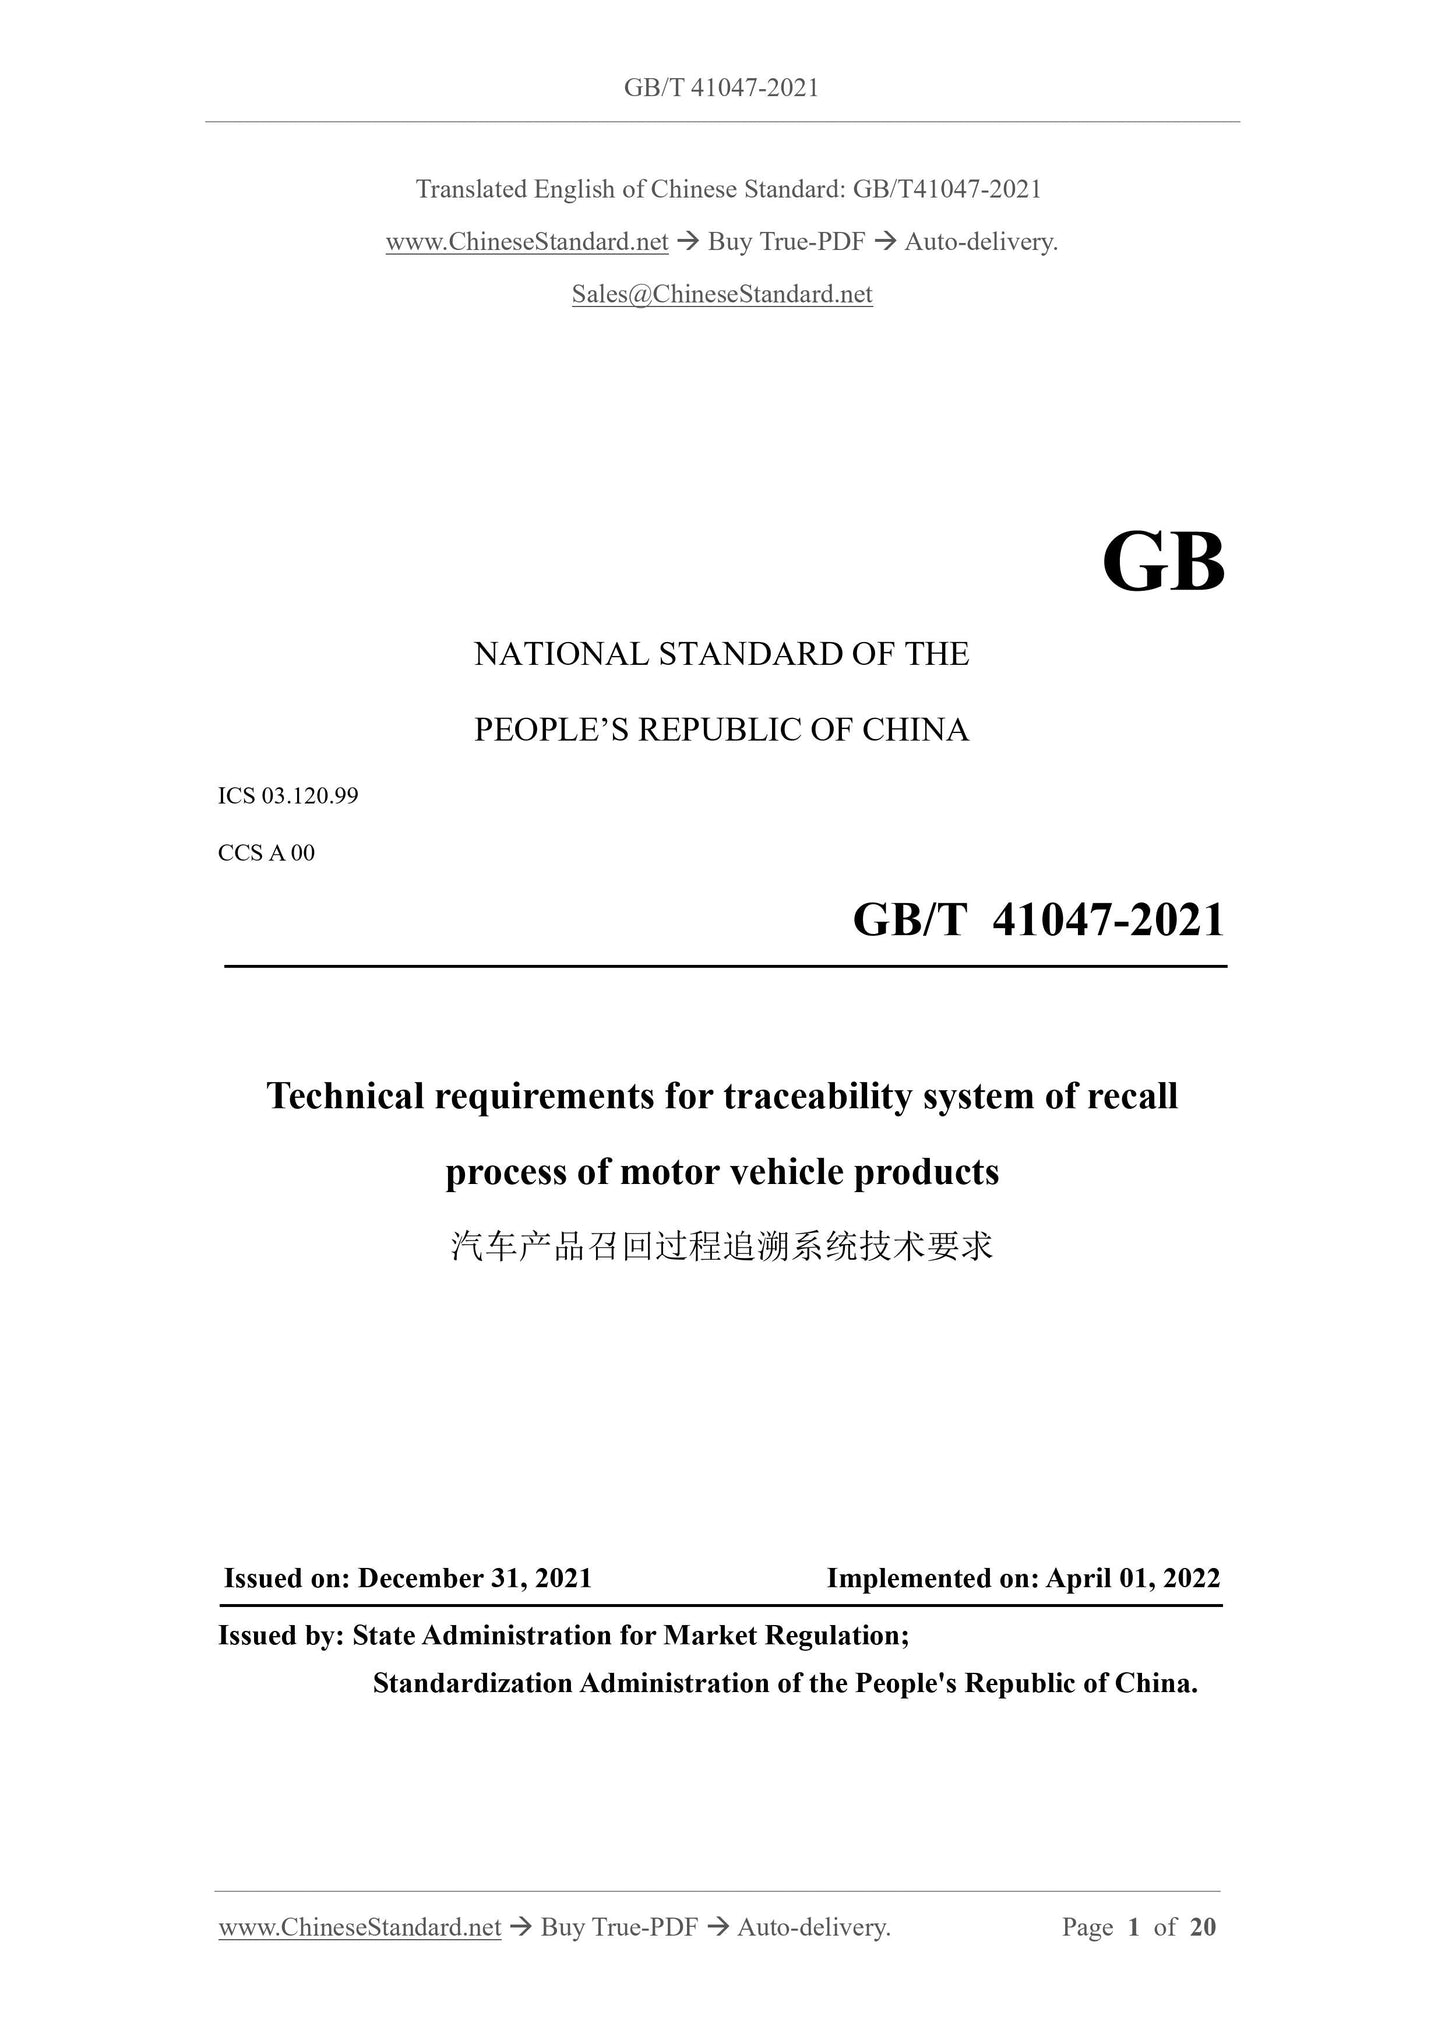 GB/T 41047-2021 Page 1